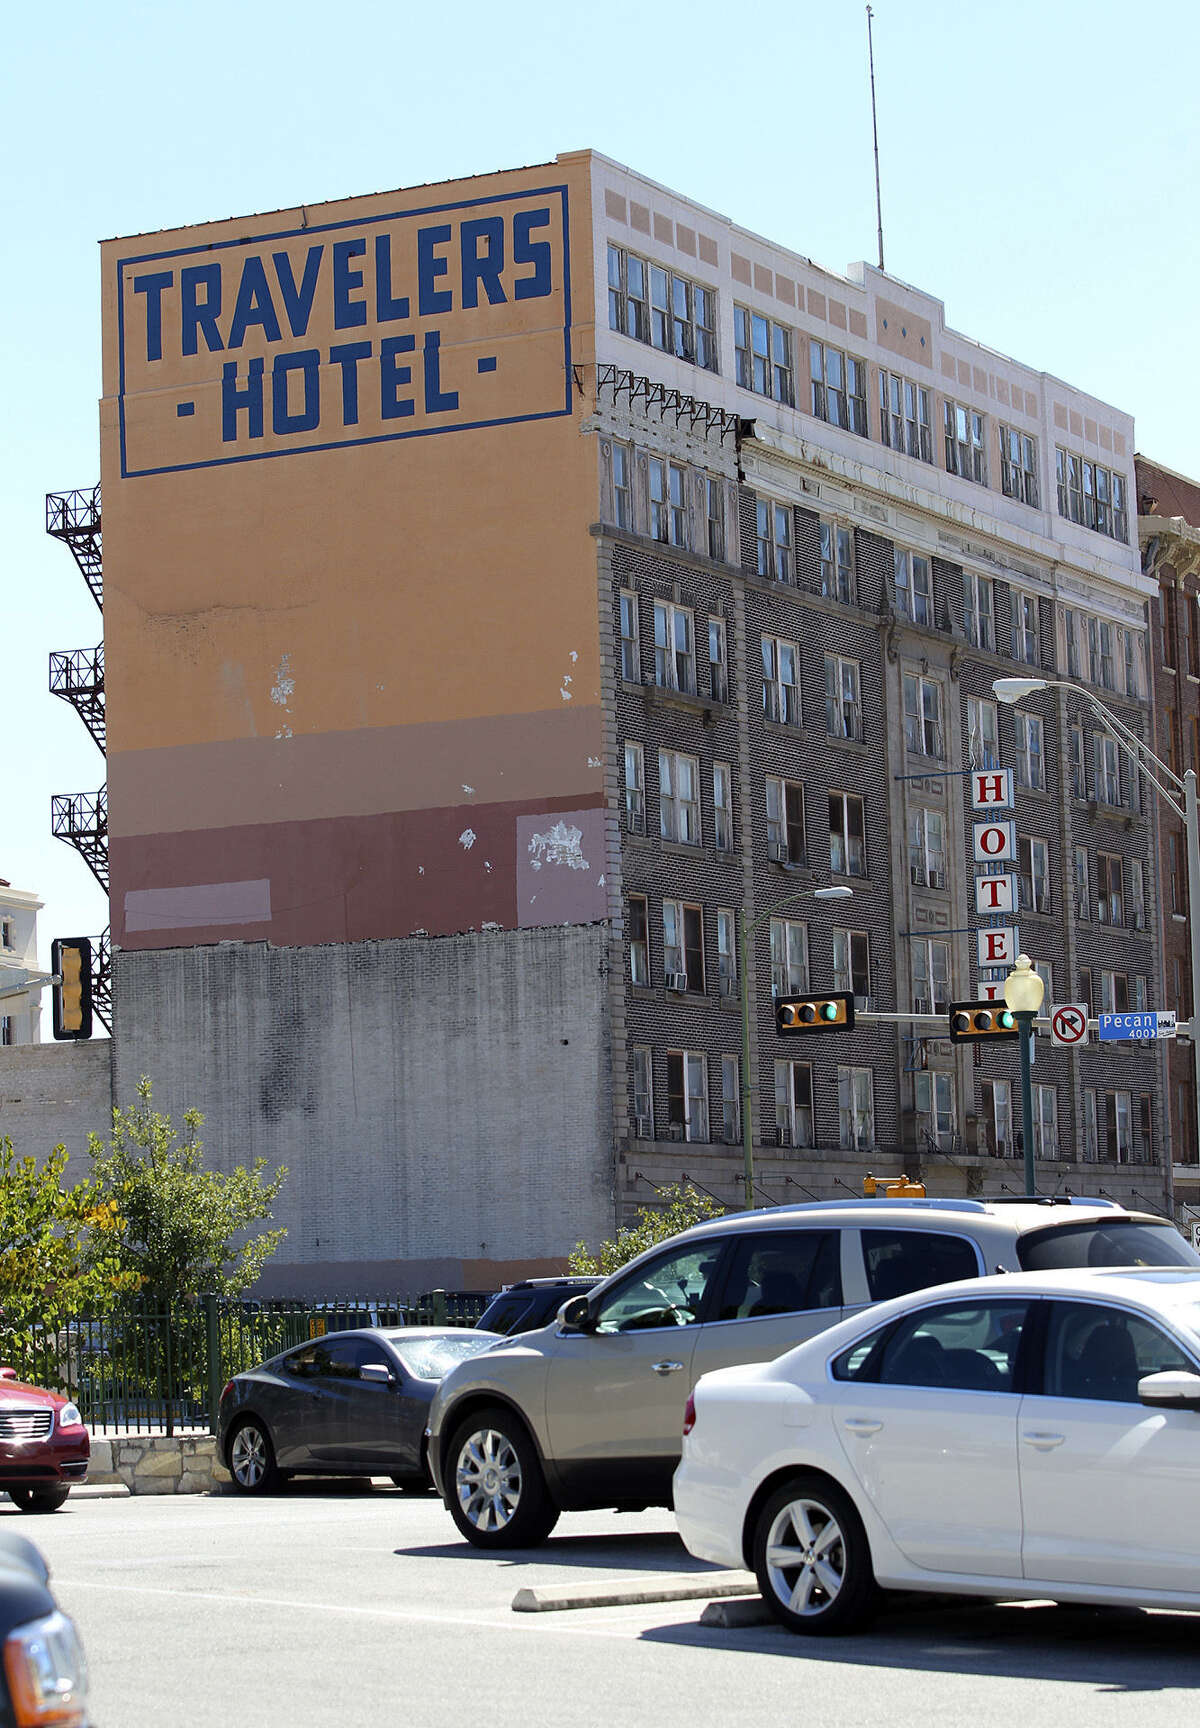 The Travelers Hotel was considered upscale when it opened in 1914 but hasn't been that way for years.